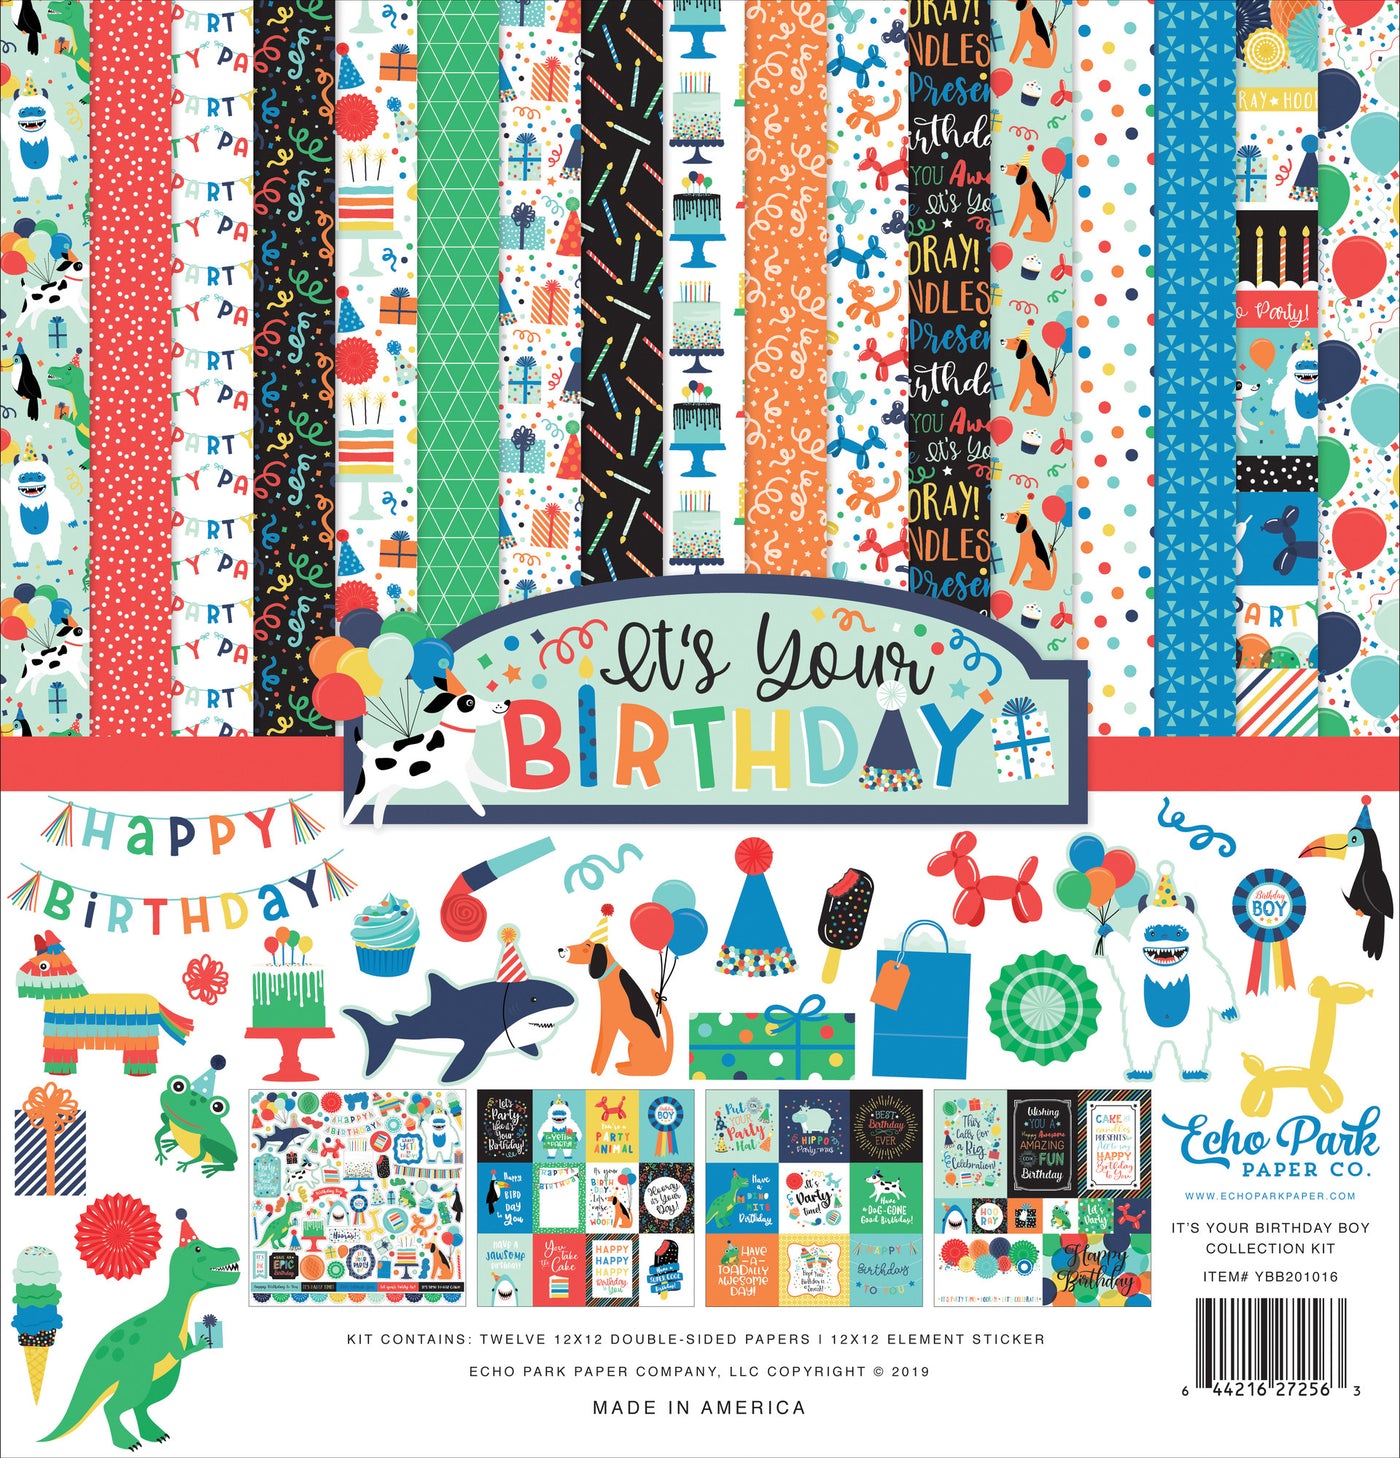 Twelve double-sided designer sheets with perfect designs to create memories for a boy's birthday party. Boy-relevant, party-related themes. 12x12 textured cardstock.